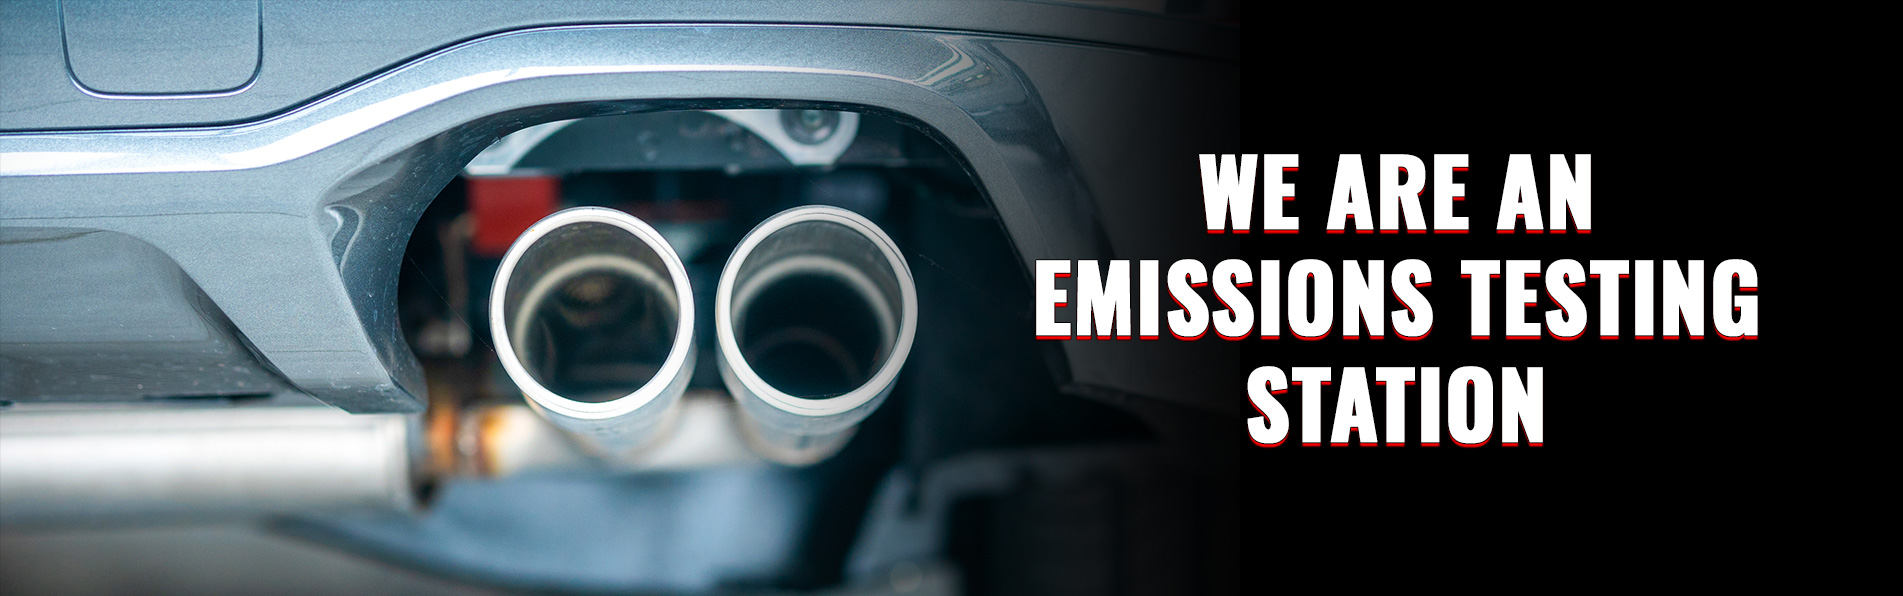 We Are An Emissions Testing Station